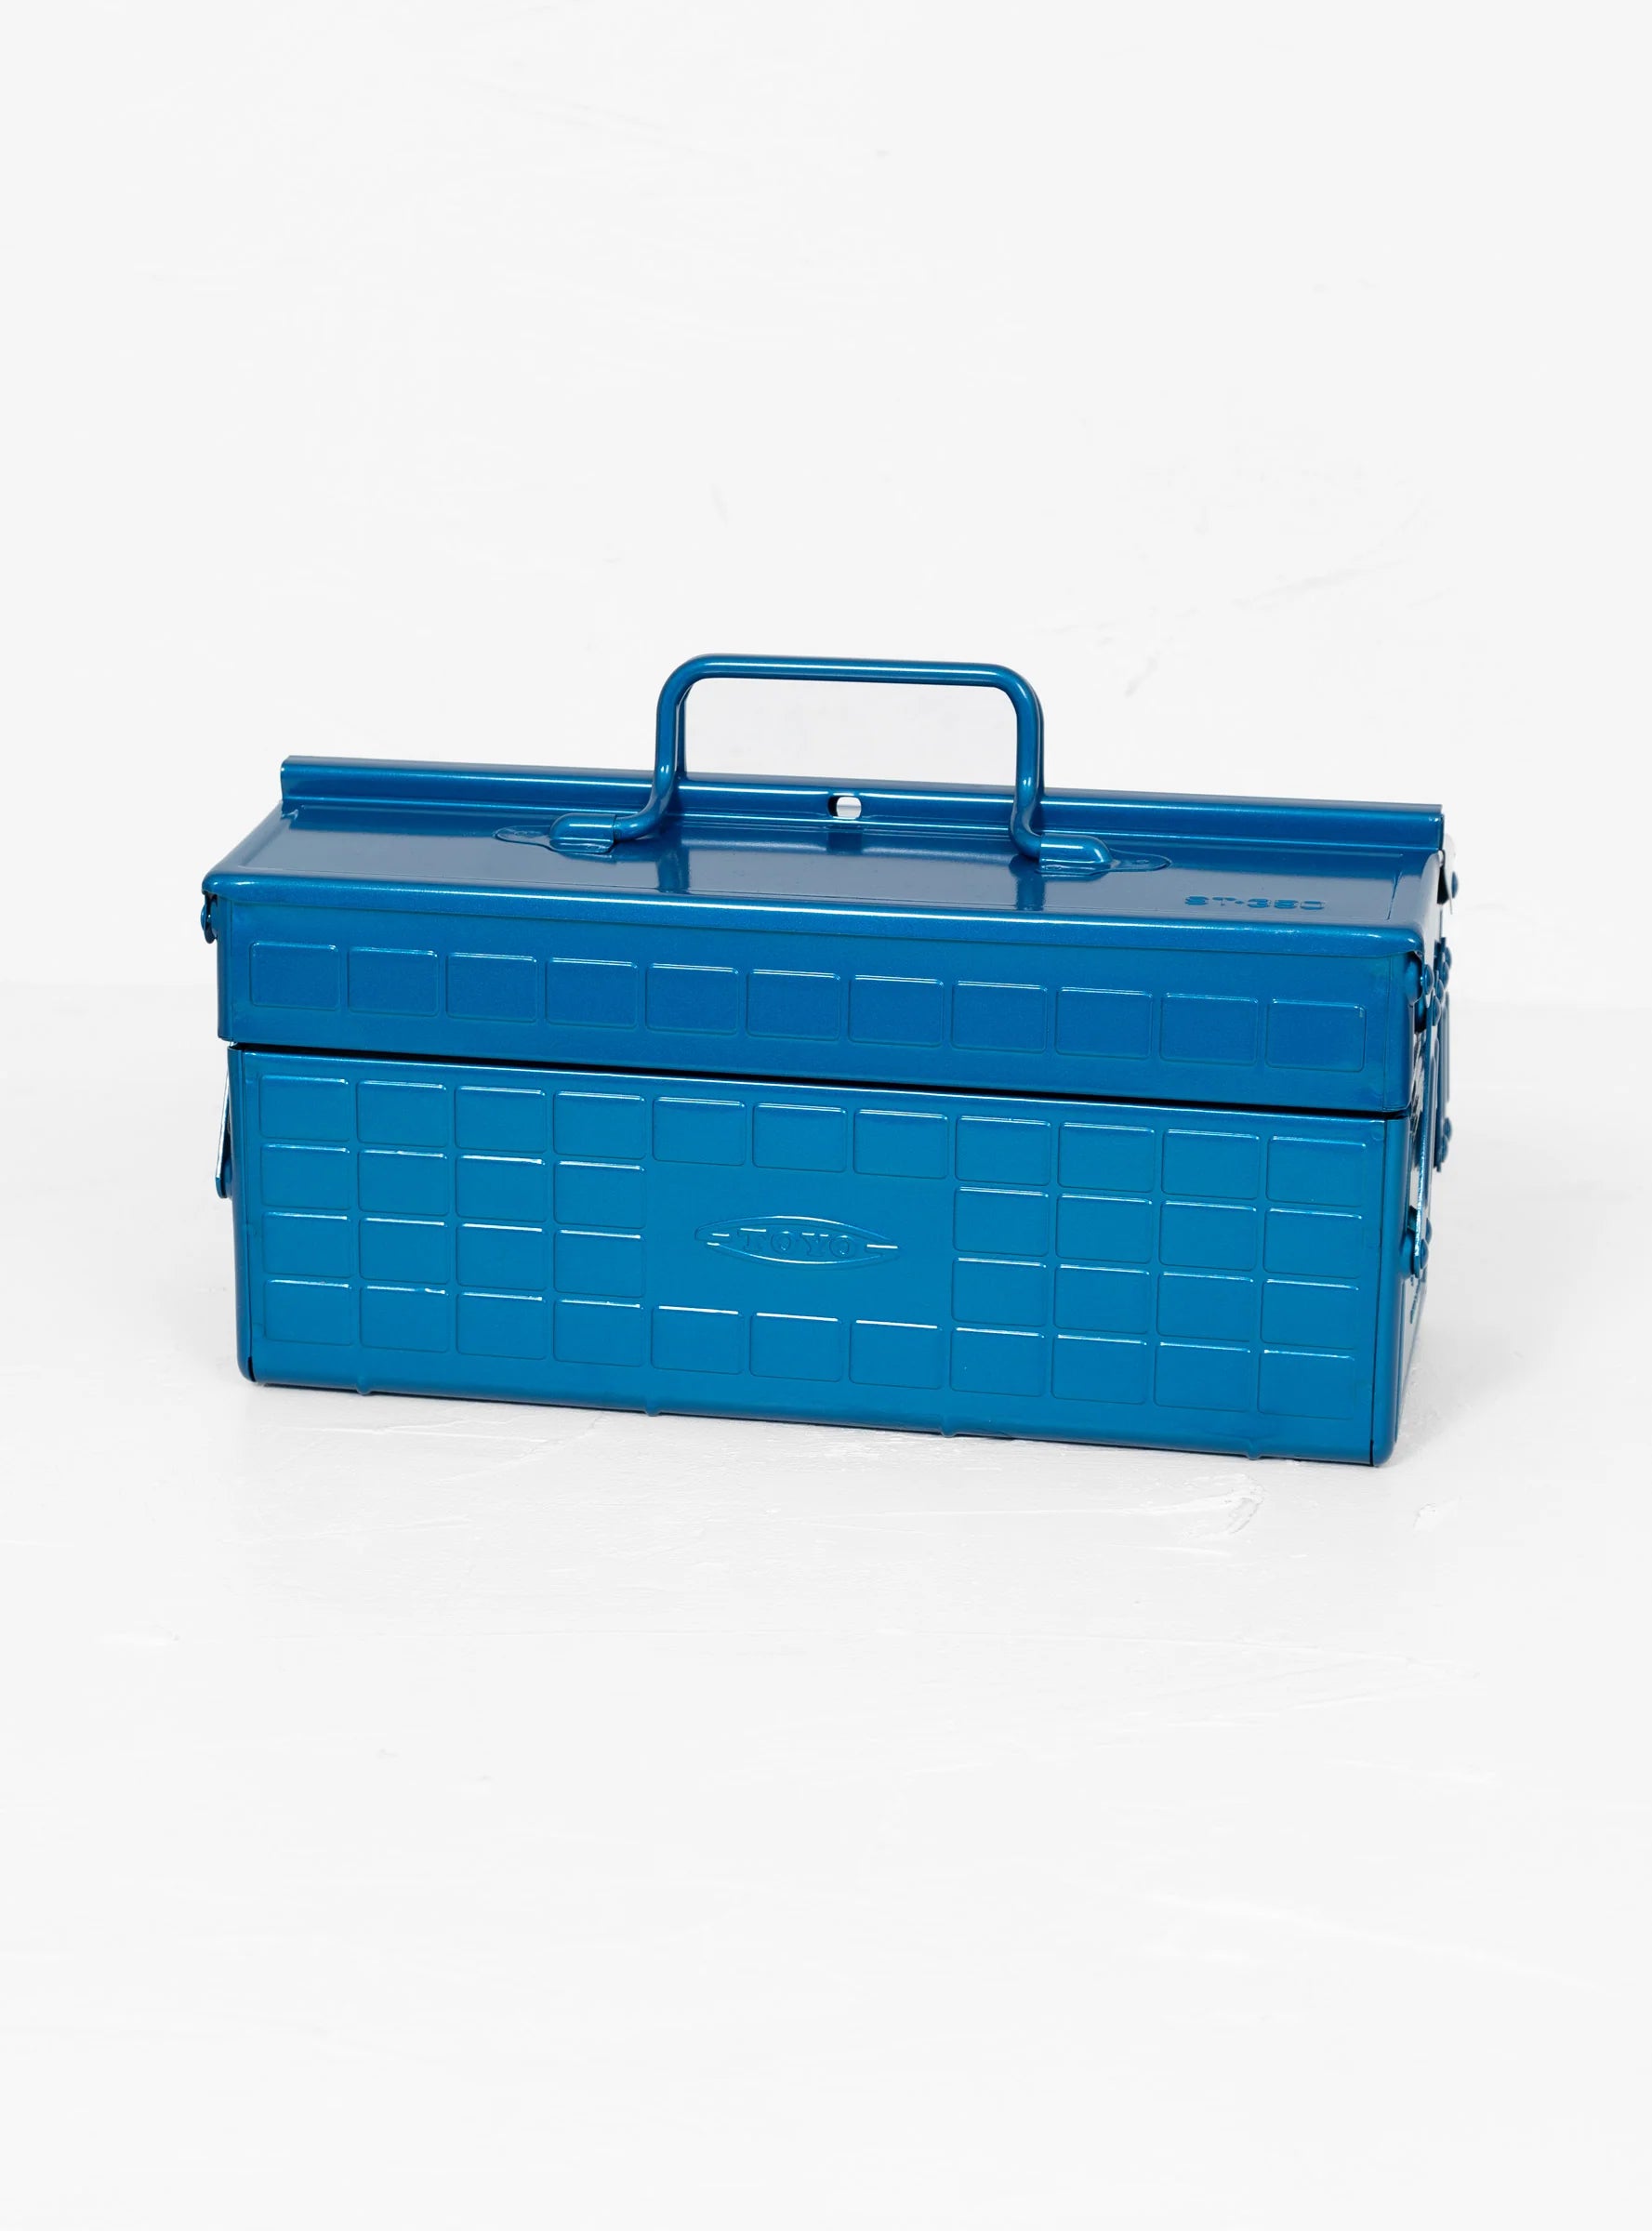 TOYO + ST-350 Cantilever Toolbox Blue